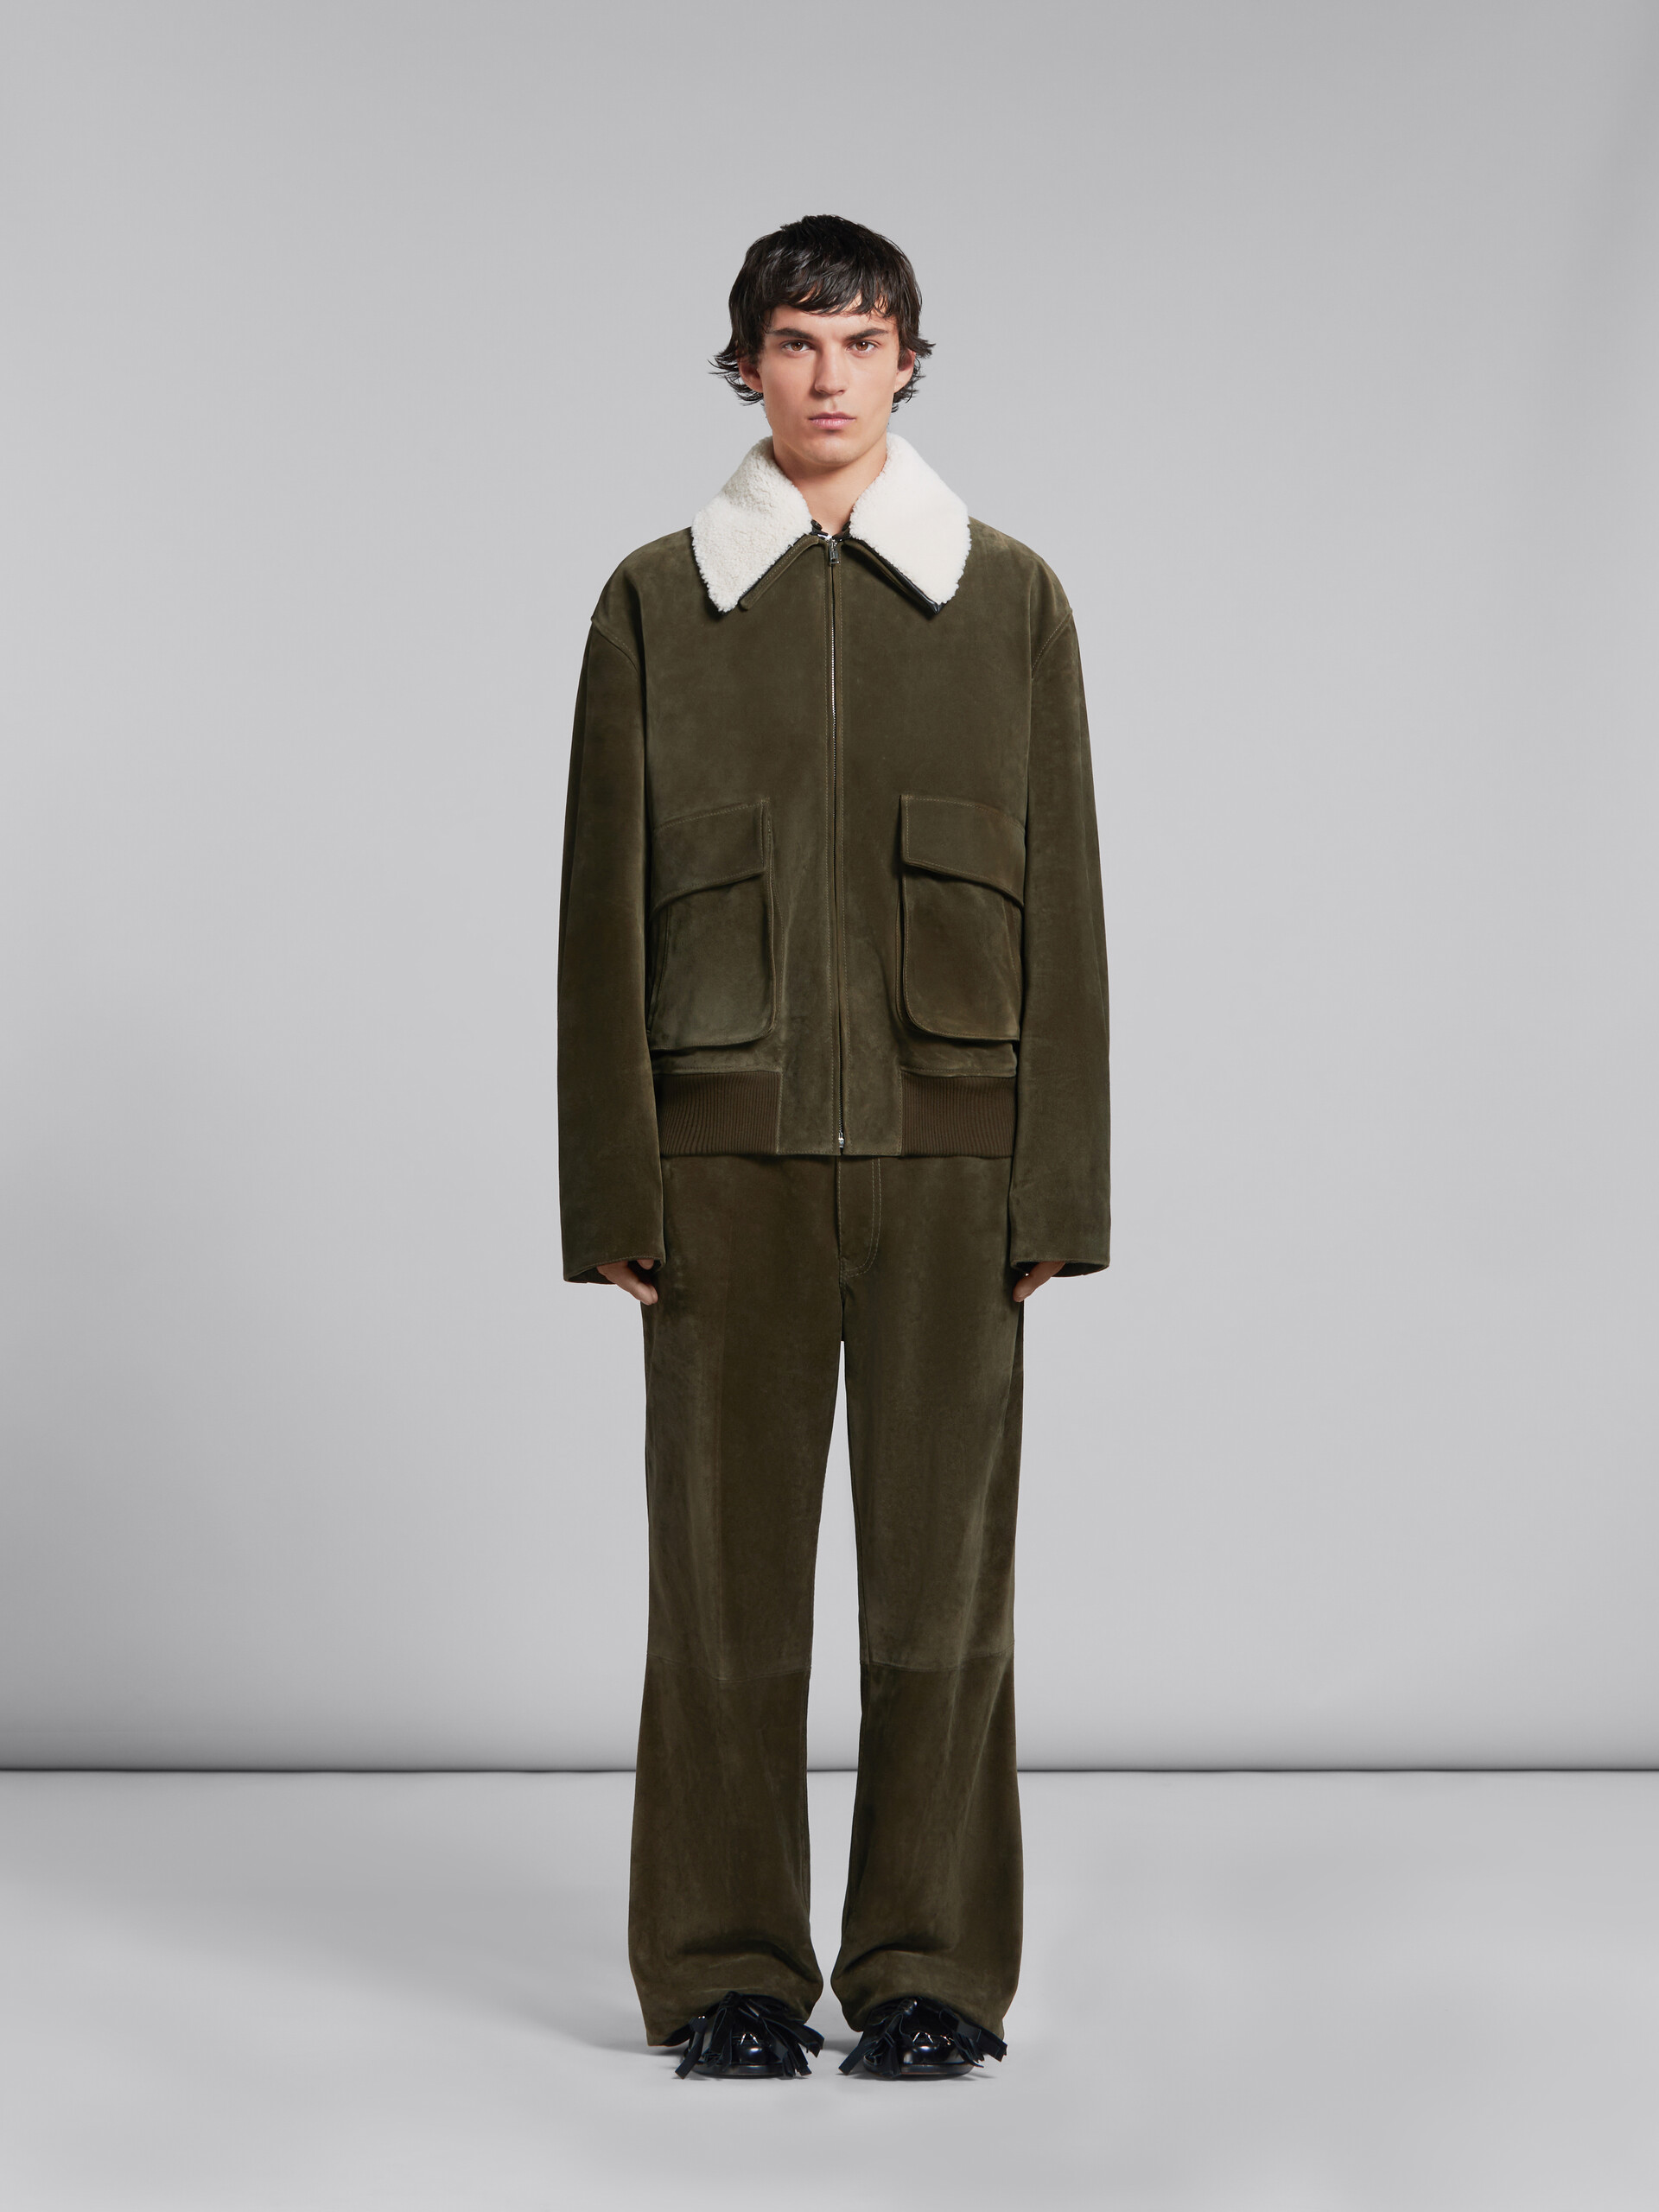 Green suede jacket with shearling collar | Marni